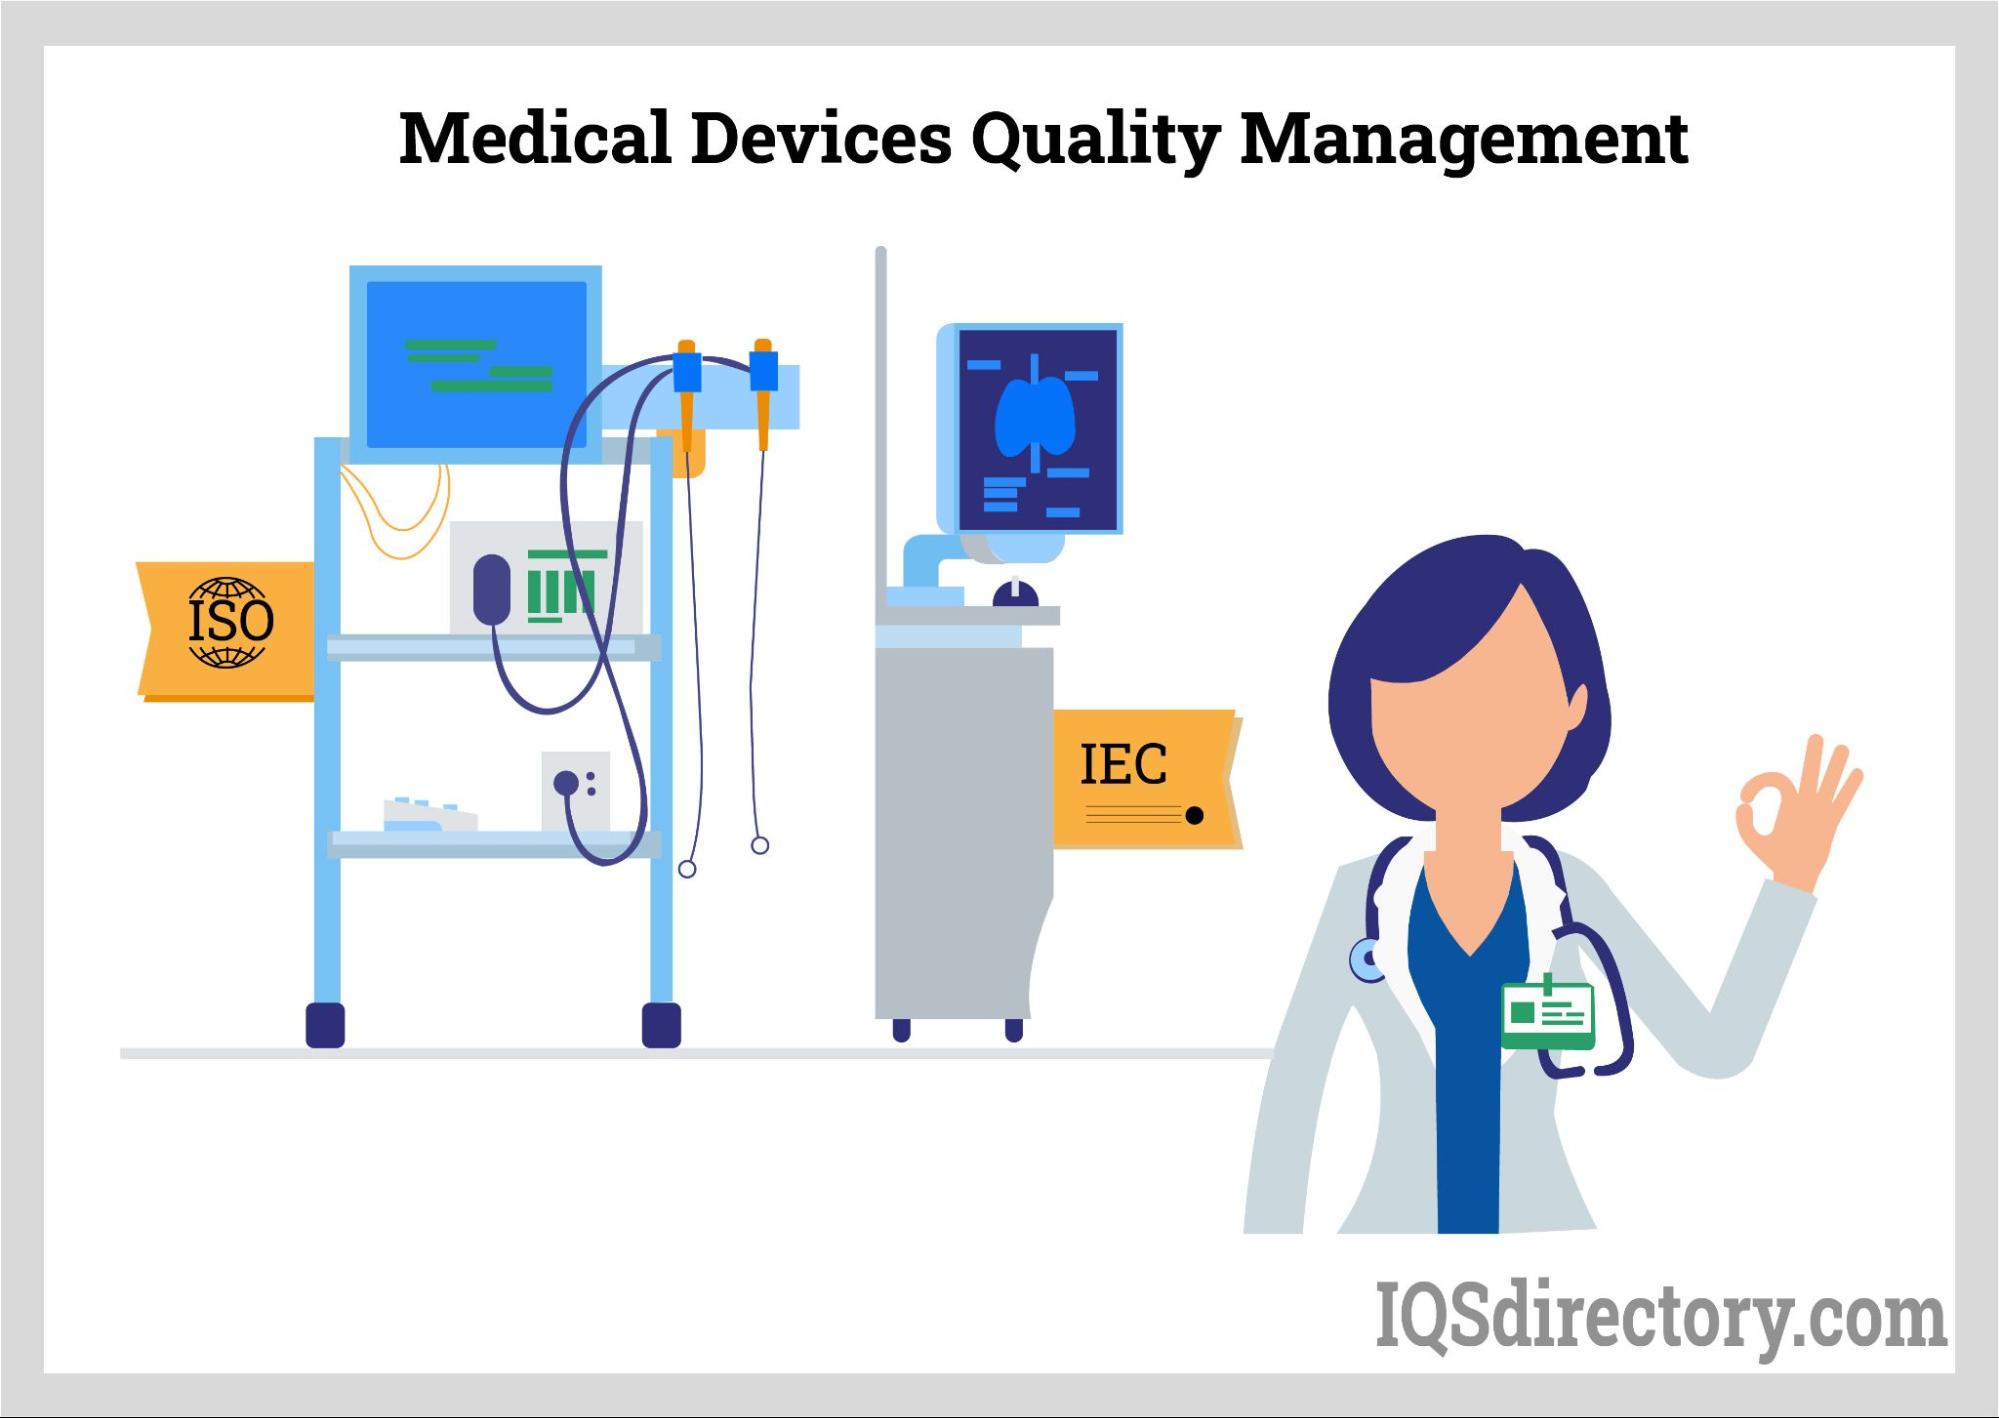 Medical Devices Quality Management